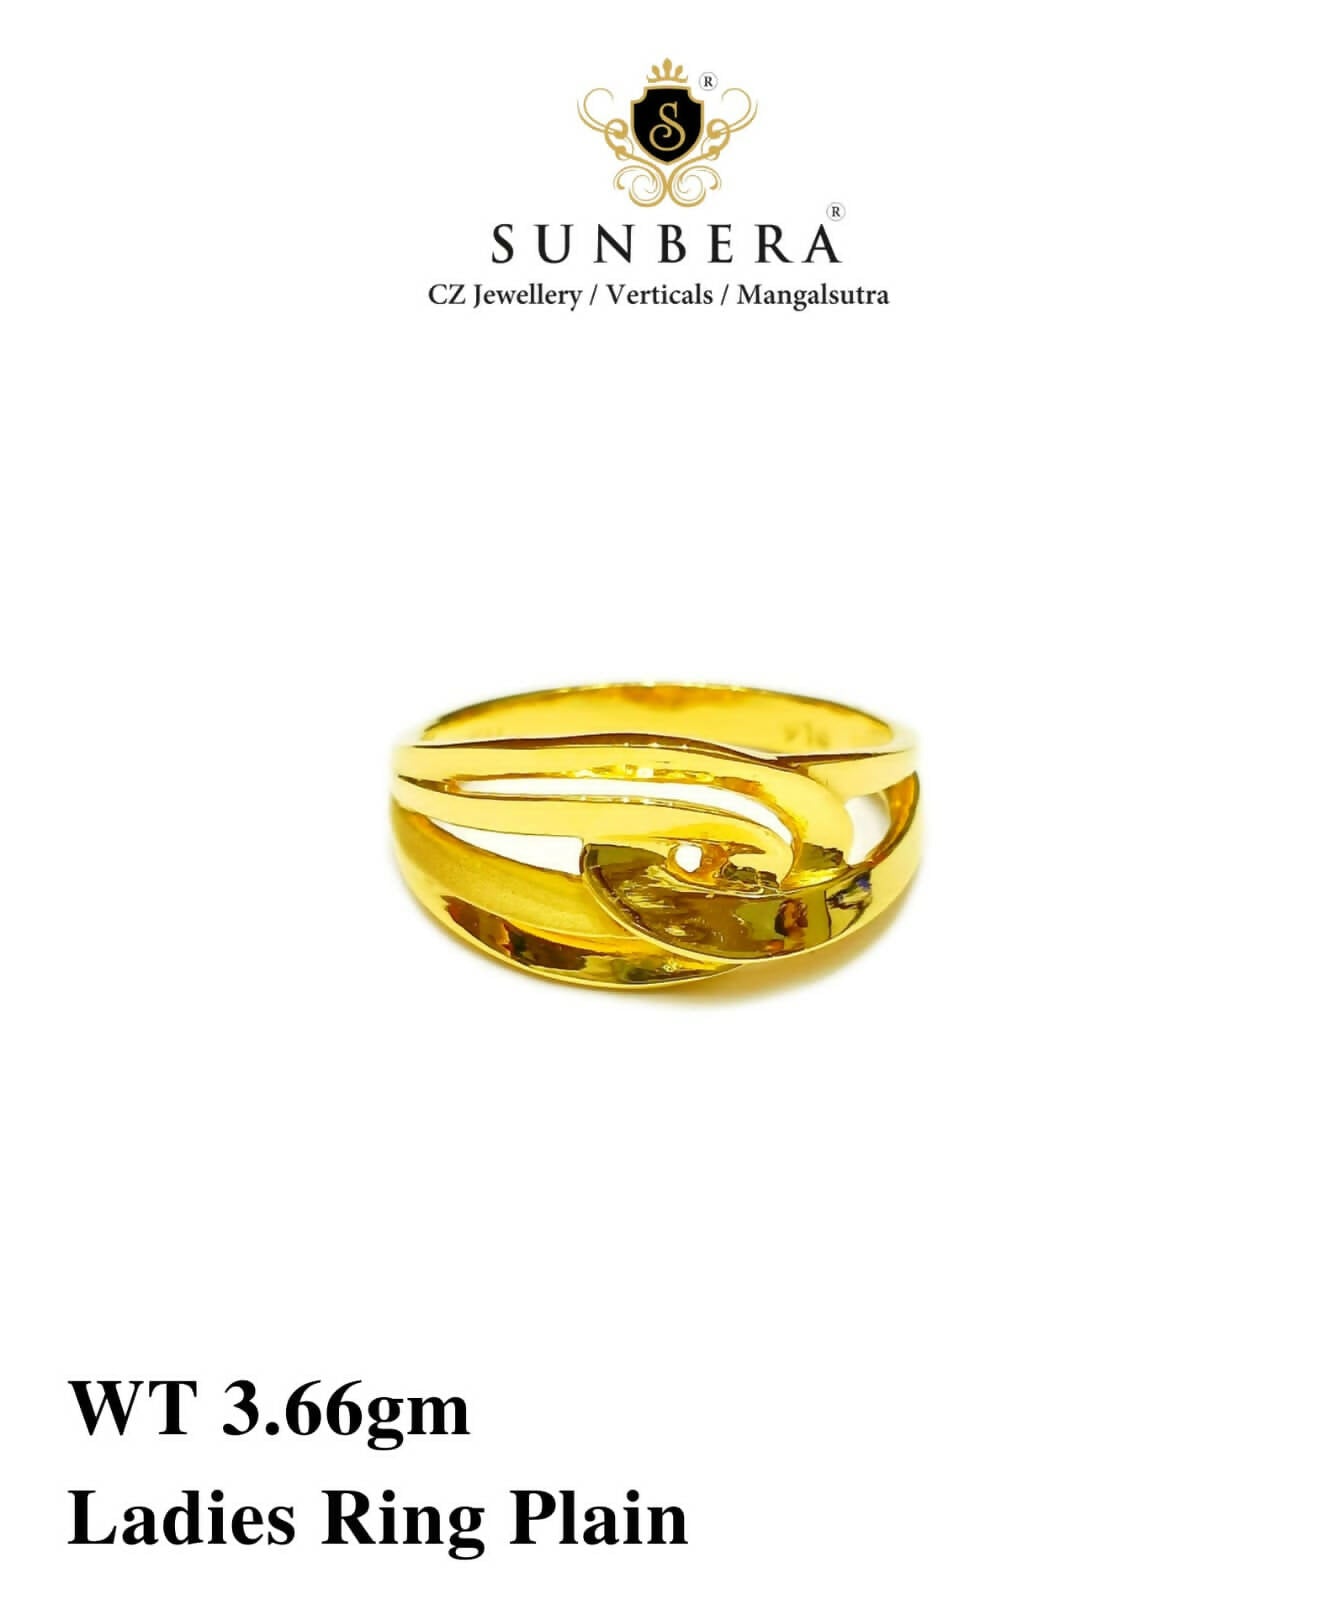 Single Band Mangalsutra Ring at Rs 3499.00 | 925 Sterling Silver Ring | ID:  2851089488948